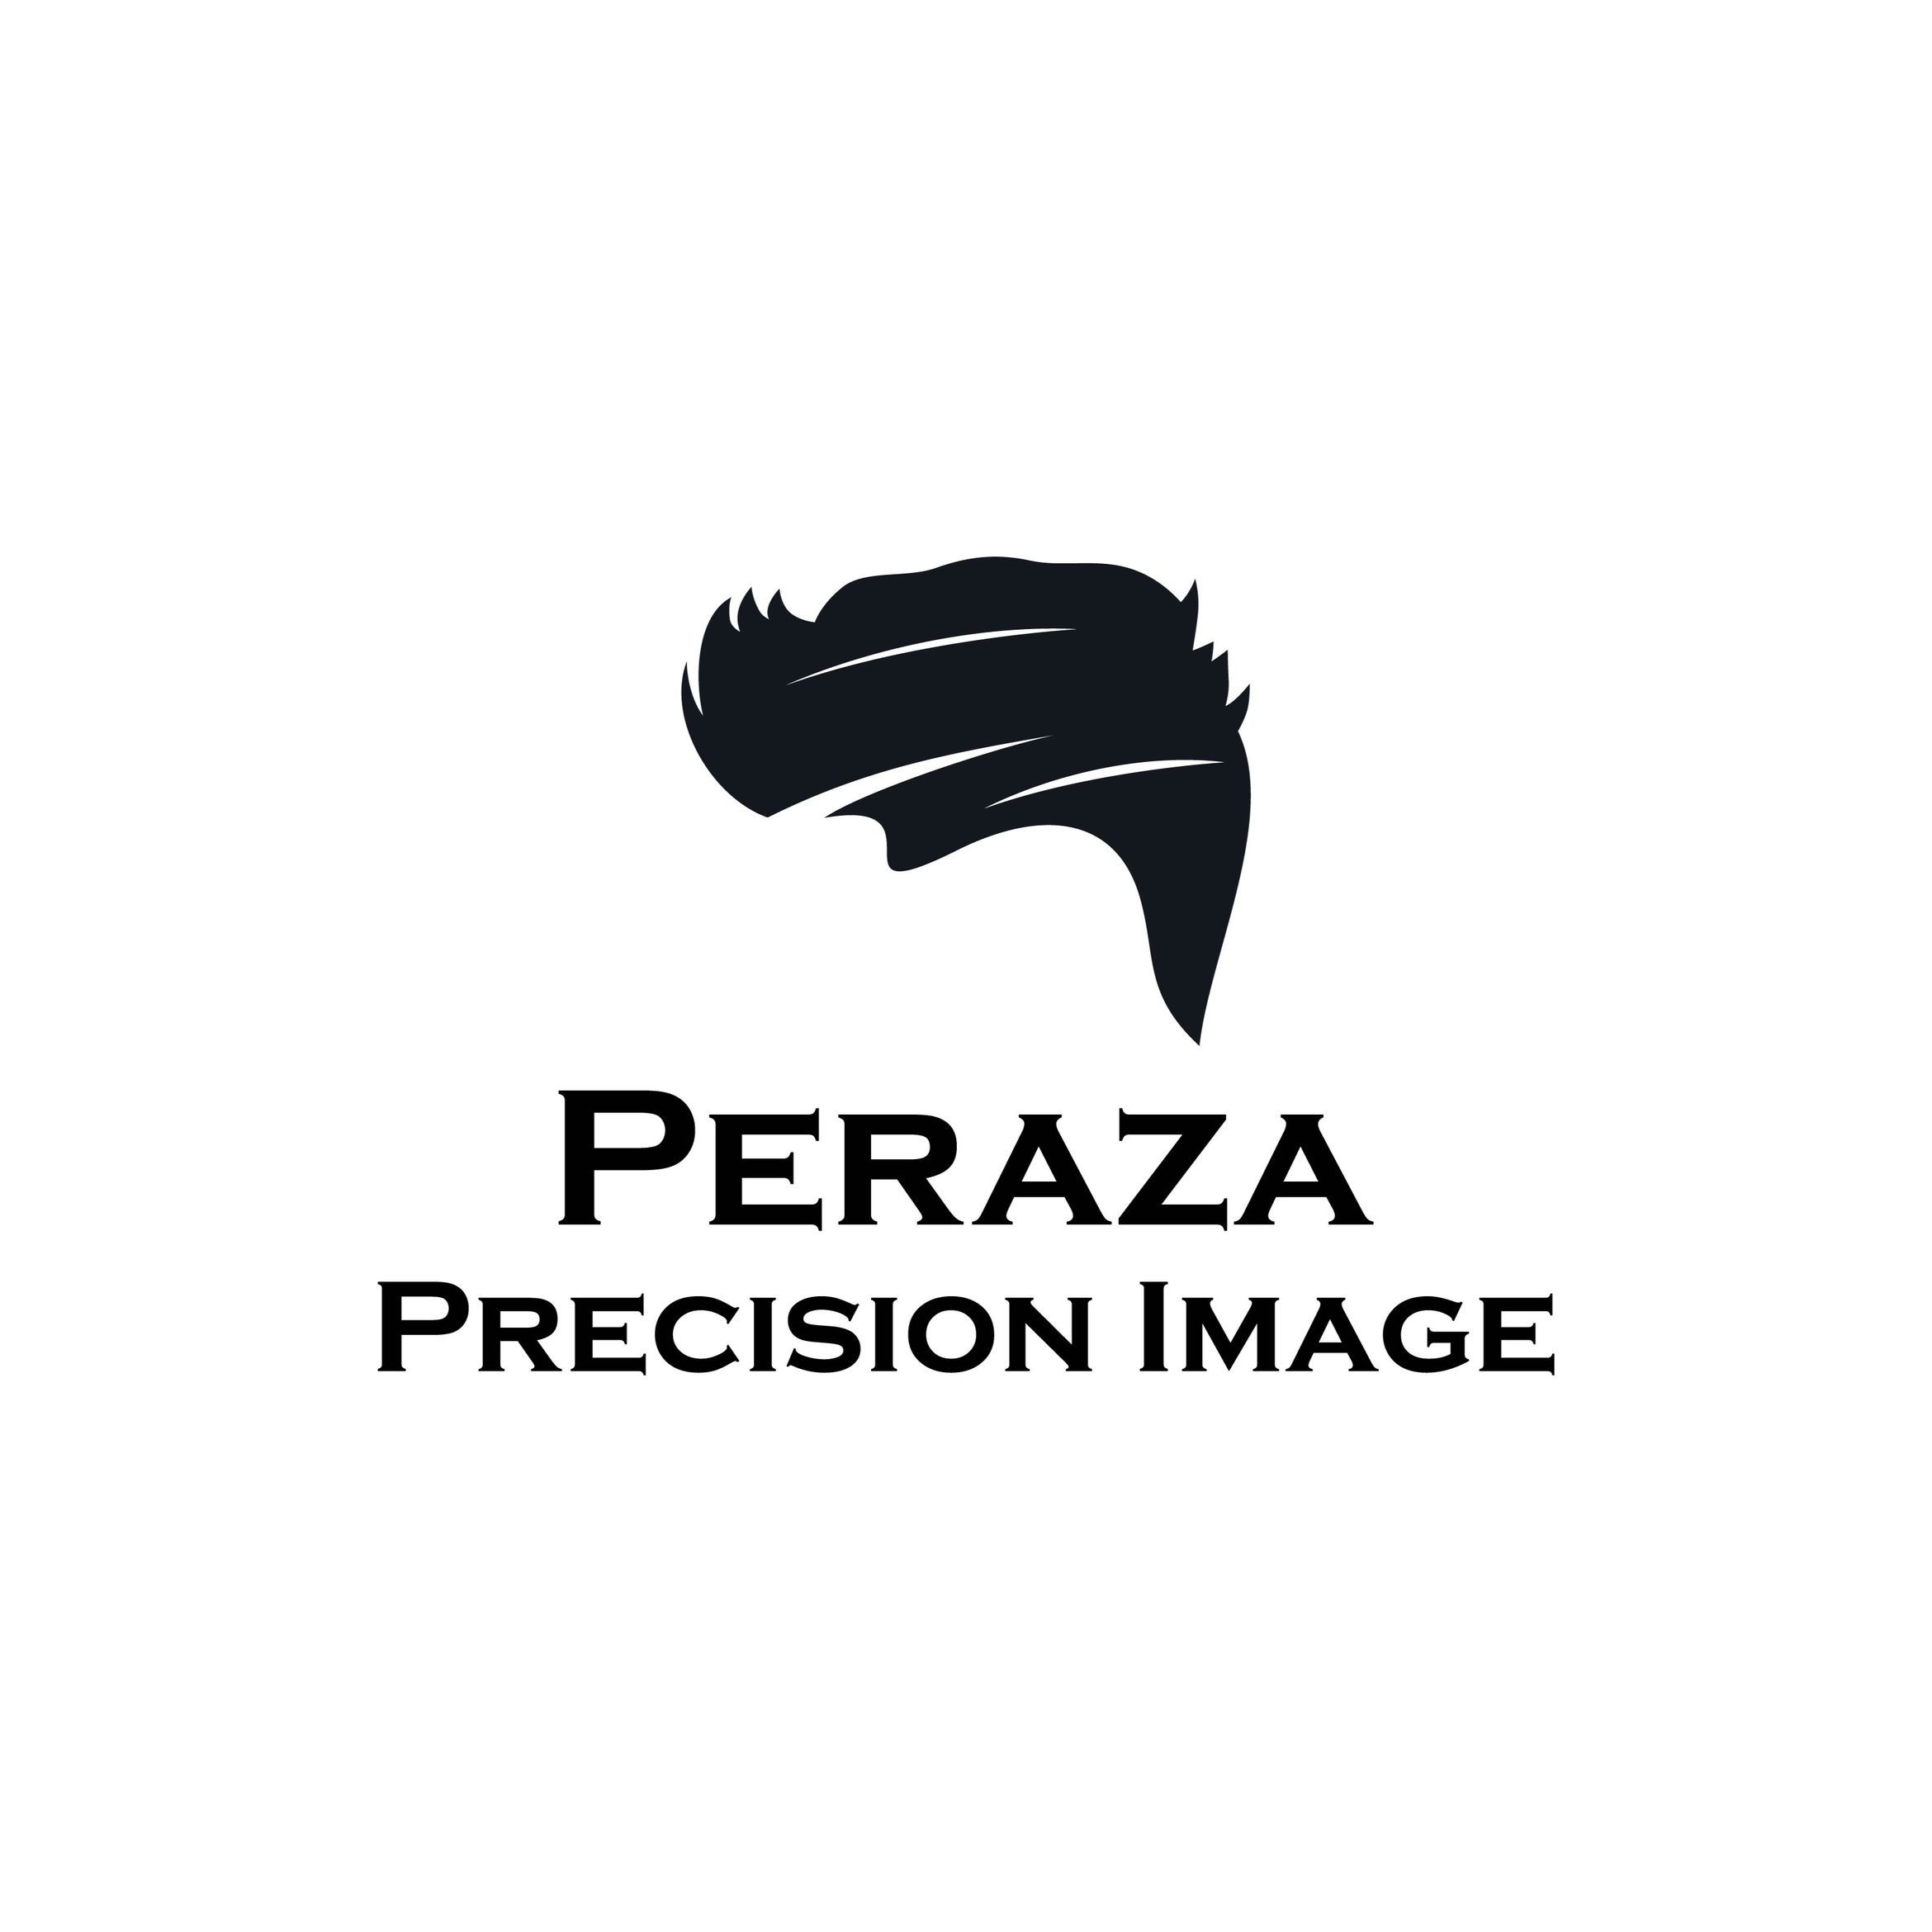 Peraza Precision Image @ Lions Mane Barbershop, 4279 South HWY 27, Suite H, Clermont, 34711